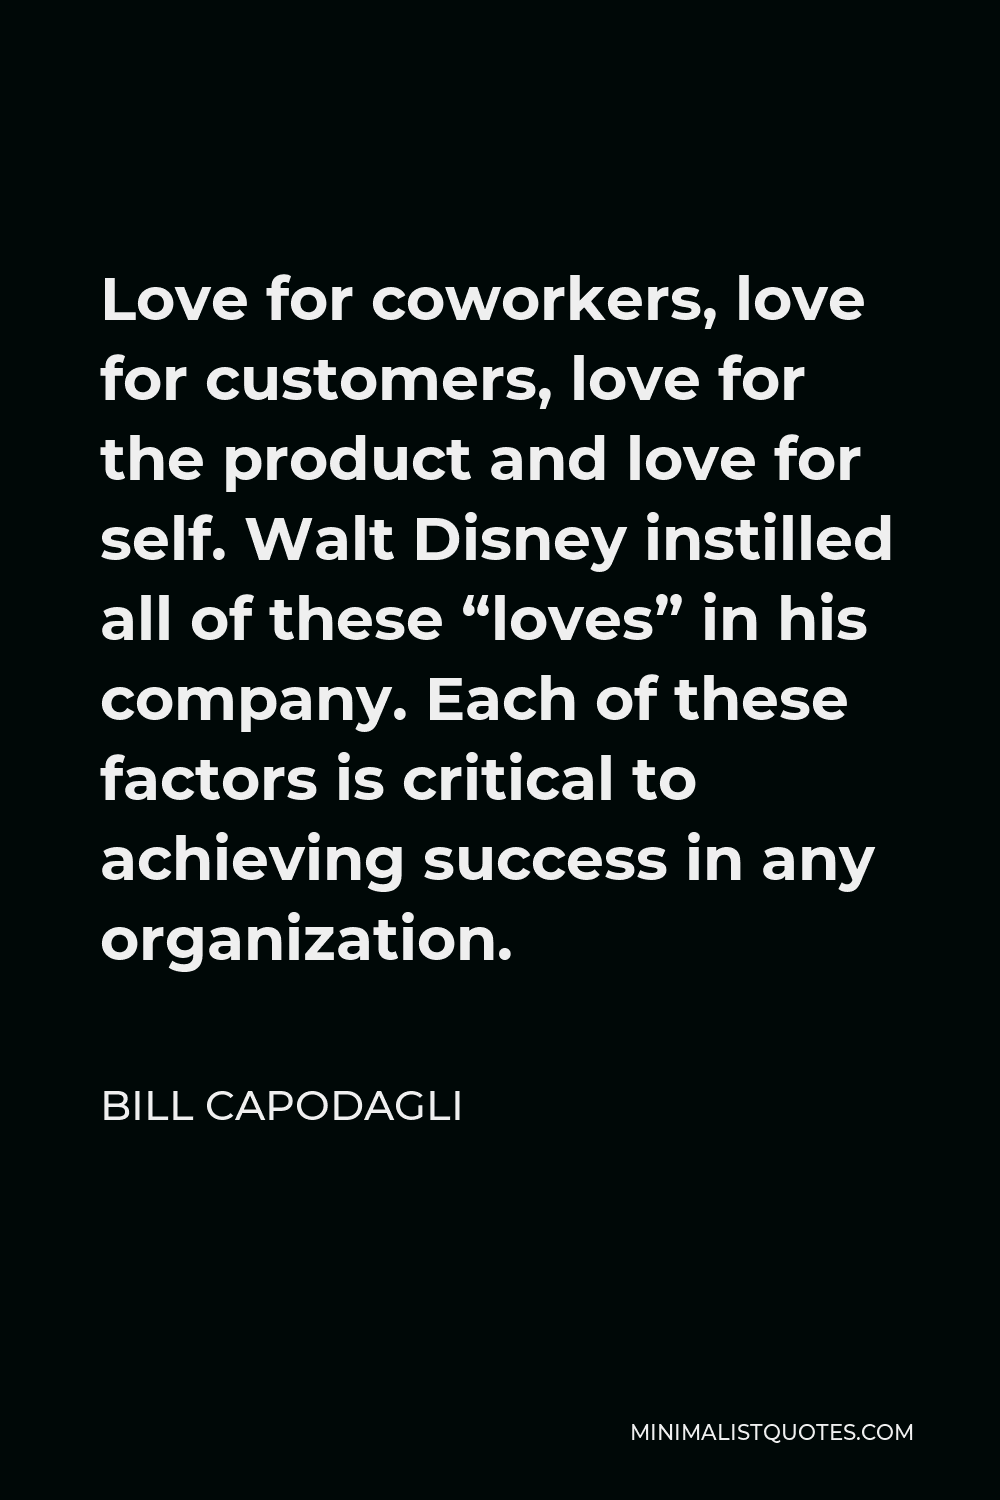 Bill Capodagli Quote - Love for coworkers, love for customers, love for the product and love for self. Walt Disney instilled all of these “loves” in his company. Each of these factors is critical to achieving success in any organization.